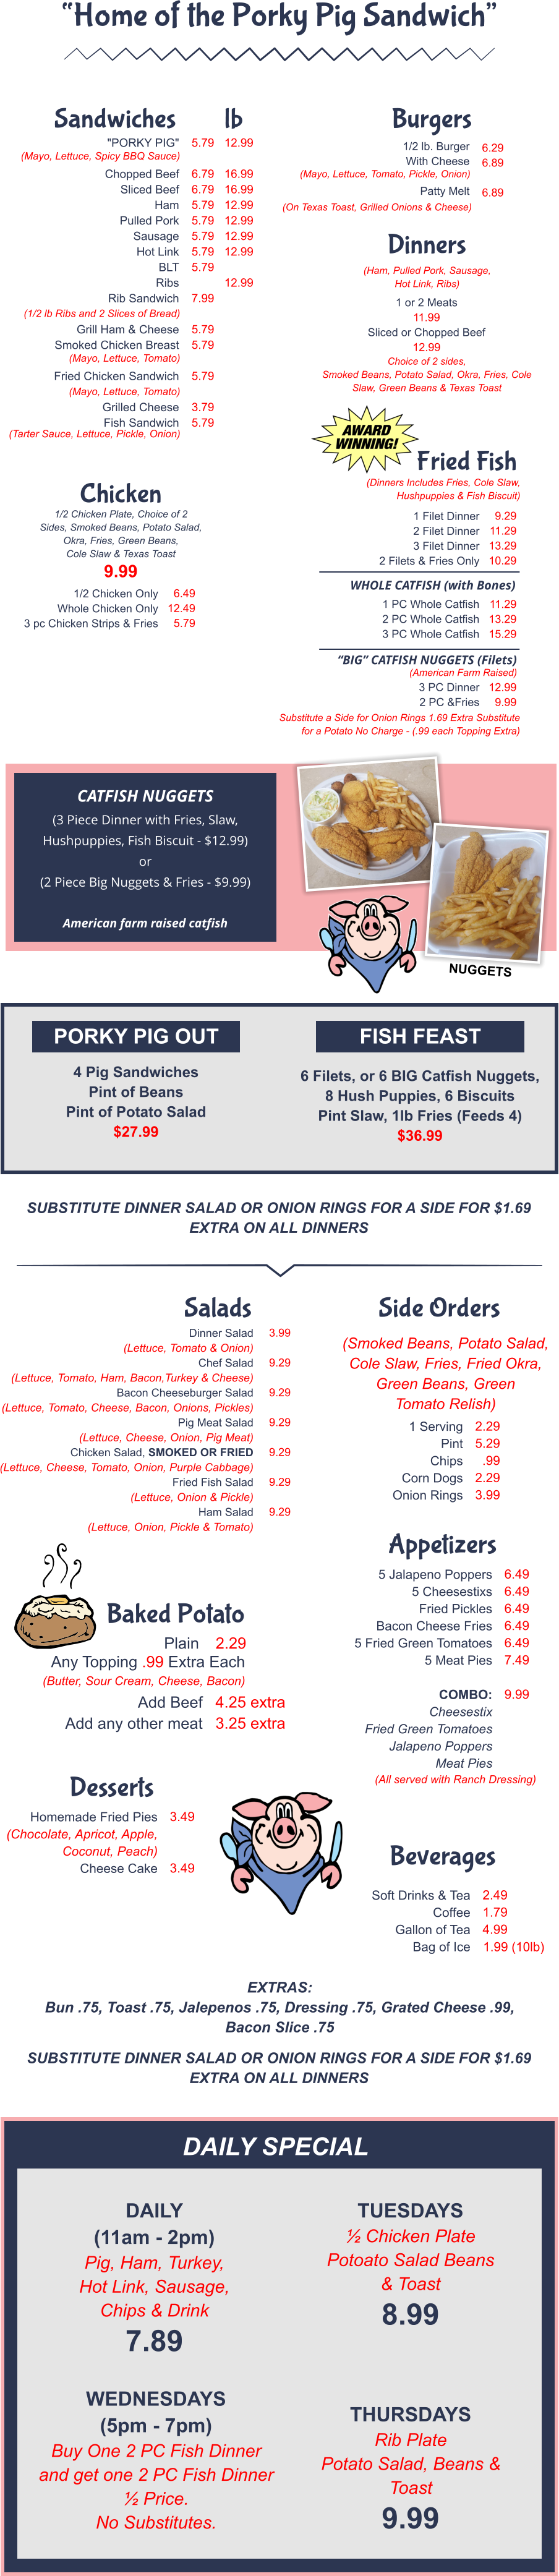 PORKY PIG OUT FISH FEAST 4 Pig Sandwiches Pint of Beans Pint of Potato Salad $27.99 6 Filets, or 6 BIG Catfish Nuggets, 8 Hush Puppies, 6 Biscuits Pint Slaw, 1lb Fries (Feeds 4) $36.99 SUBSTITUTE DINNER SALAD OR ONION RINGS FOR A SIDE FOR $1.69 EXTRA ON ALL DINNERS EXTRAS:  Bun .75, Toast .75, Jalepenos .75, Dressing .75, Grated Cheese .99, Bacon Slice .75 SUBSTITUTE DINNER SALAD OR ONION RINGS FOR A SIDE FOR $1.69 EXTRA ON ALL DINNERS DAILY SPECIALS DAILY (11am - 2pm) Pig, Ham, Turkey, Hot Link, Sausage, Chips & Drink 7.89 TUESDAYS ½ Chicken Plate Potoato Salad Beans & Toast 8.99 WEDNESDAYS (5pm - 7pm) Buy One 2 PC Fish Dinner and get one 2 PC Fish Dinner ½ Price. No Substitutes. THURSDAYS Rib Plate Potato Salad, Beans & Toast 9.99 "PORKY PIG"  Chopped Beef Sliced Beef Ham Pulled Pork Sausage Hot Link BLT Ribs Rib Sandwich  Grill Ham & Cheese Smoked Chicken Breast  Fried Chicken Sandwich  Grilled Cheese Fish Sandwich 5.79  6.79 6.79 5.79 5.79 5.79 5.79 5.79  7.99  5.79 5.79  5.79  3.79 5.79 12.99  16.99 16.99 12.99 12.99 12.99 12.99  12.99 (Mayo, Lettuce, Spicy BBQ Sauce) (1/2 lb Ribs and 2 Slices of Bread) (Mayo, Lettuce, Tomato) (Mayo, Lettuce, Tomato) (Tarter Sauce, Lettuce, Pickle, Onion) Sandwiches lb 1/2 lb. Burger With Cheese  Patty Melt (Mayo, Lettuce, Tomato, Pickle, Onion) (On Texas Toast, Grilled Onions & Cheese) 6.29 6.89  6.89 Burgers (Ham, Pulled Pork, Sausage, Hot Link, Ribs) 1 or 2 Meats 11.99 Sliced or Chopped Beef 12.99 Choice of 2 sides, Smoked Beans, Potato Salad, Okra, Fries, Cole Slaw, Green Beans & Texas Toast Dinners 1/2 Chicken Plate, Choice of 2 Sides, Smoked Beans, Potato Salad, Okra, Fries, Green Beans, Cole Slaw & Texas Toast 9.99 1/2 Chicken Only Whole Chicken Only 3 pc Chicken Strips & Fries 6.49 12.49 5.79 Chicken Dinner Salad (Lettuce, Tomato & Onion) Chef Salad (Lettuce, Tomato, Ham, Bacon,Turkey & Cheese) Bacon Cheeseburger Salad (Lettuce, Tomato, Cheese, Bacon, Onions, Pickles) Pig Meat Salad (Lettuce, Cheese, Onion, Pig Meat) Chicken Salad, SMOKED OR FRIED (Lettuce, Cheese, Tomato, Onion, Purple Cabbage) Fried Fish Salad (Lettuce, Onion & Pickle) Ham Salad (Lettuce, Onion, Pickle & Tomato)  3.99  9.29  9.29  9.29  9.29  9.29  9.29 Salads (Smoked Beans, Potato Salad, Cole Slaw, Fries, Fried Okra, Green Beans, Green Tomato Relish) 1 Serving Pint Chips Corn Dogs Onion Rings 2.29 5.29 .99 2.29 3.99 Side Orders Plain 2.29 Any Topping .99 Extra Each (Butter, Sour Cream, Cheese, Bacon) Add Beef Add any other meat 4.25 extra 3.25 extra Baked Potato 5 Jalapeno Poppers 5 Cheesestixs Fried Pickles Bacon Cheese Fries 5 Fried Green Tomatoes 5 Meat Pies  COMBO: Cheesestix Fried Green Tomatoes Jalapeno Poppers Meat Pies 6.49 6.49 6.49 6.49 6.49 7.49  9.99 (All served with Ranch Dressing) Appetizers Homemade Fried Pies (Chocolate, Apricot, Apple,  Coconut, Peach) Cheese Cake 3.49   3.49 Desserts Soft Drinks & Tea Coffee Gallon of Tea Bag of Ice 2.49 1.79 4.99 1.99 (10lb) Beverages “Home of the Porky Pig Sandwich”  CATFISH NUGGETS (3 Piece Dinner with Fries, Slaw, Hushpuppies, Fish Biscuit - $12.99) or (2 Piece Big Nuggets & Fries - $9.99)  American farm raised catfish (Dinners Includes Fries, Cole Slaw, Hushpuppies & Fish Biscuit) 1 Filet Dinner  2 Filet Dinner 3 Filet Dinner 2 Filets & Fries Only 9.29 11.29 13.29 10.29 1 PC Whole Catfish 2 PC Whole Catfish 3 PC Whole Catfish 11.29 13.29 15.29 Substitute a Side for Onion Rings 1.69 Extra Substitute for a Potato No Charge - (.99 each Topping Extra) Fried Fish WHOLE CATFISH (with Bones) “BIG” CATFISH NUGGETS (Filets) (American Farm Raised) 3 PC Dinner 2 PC &Fries 12.99 9.99 NUGGETS